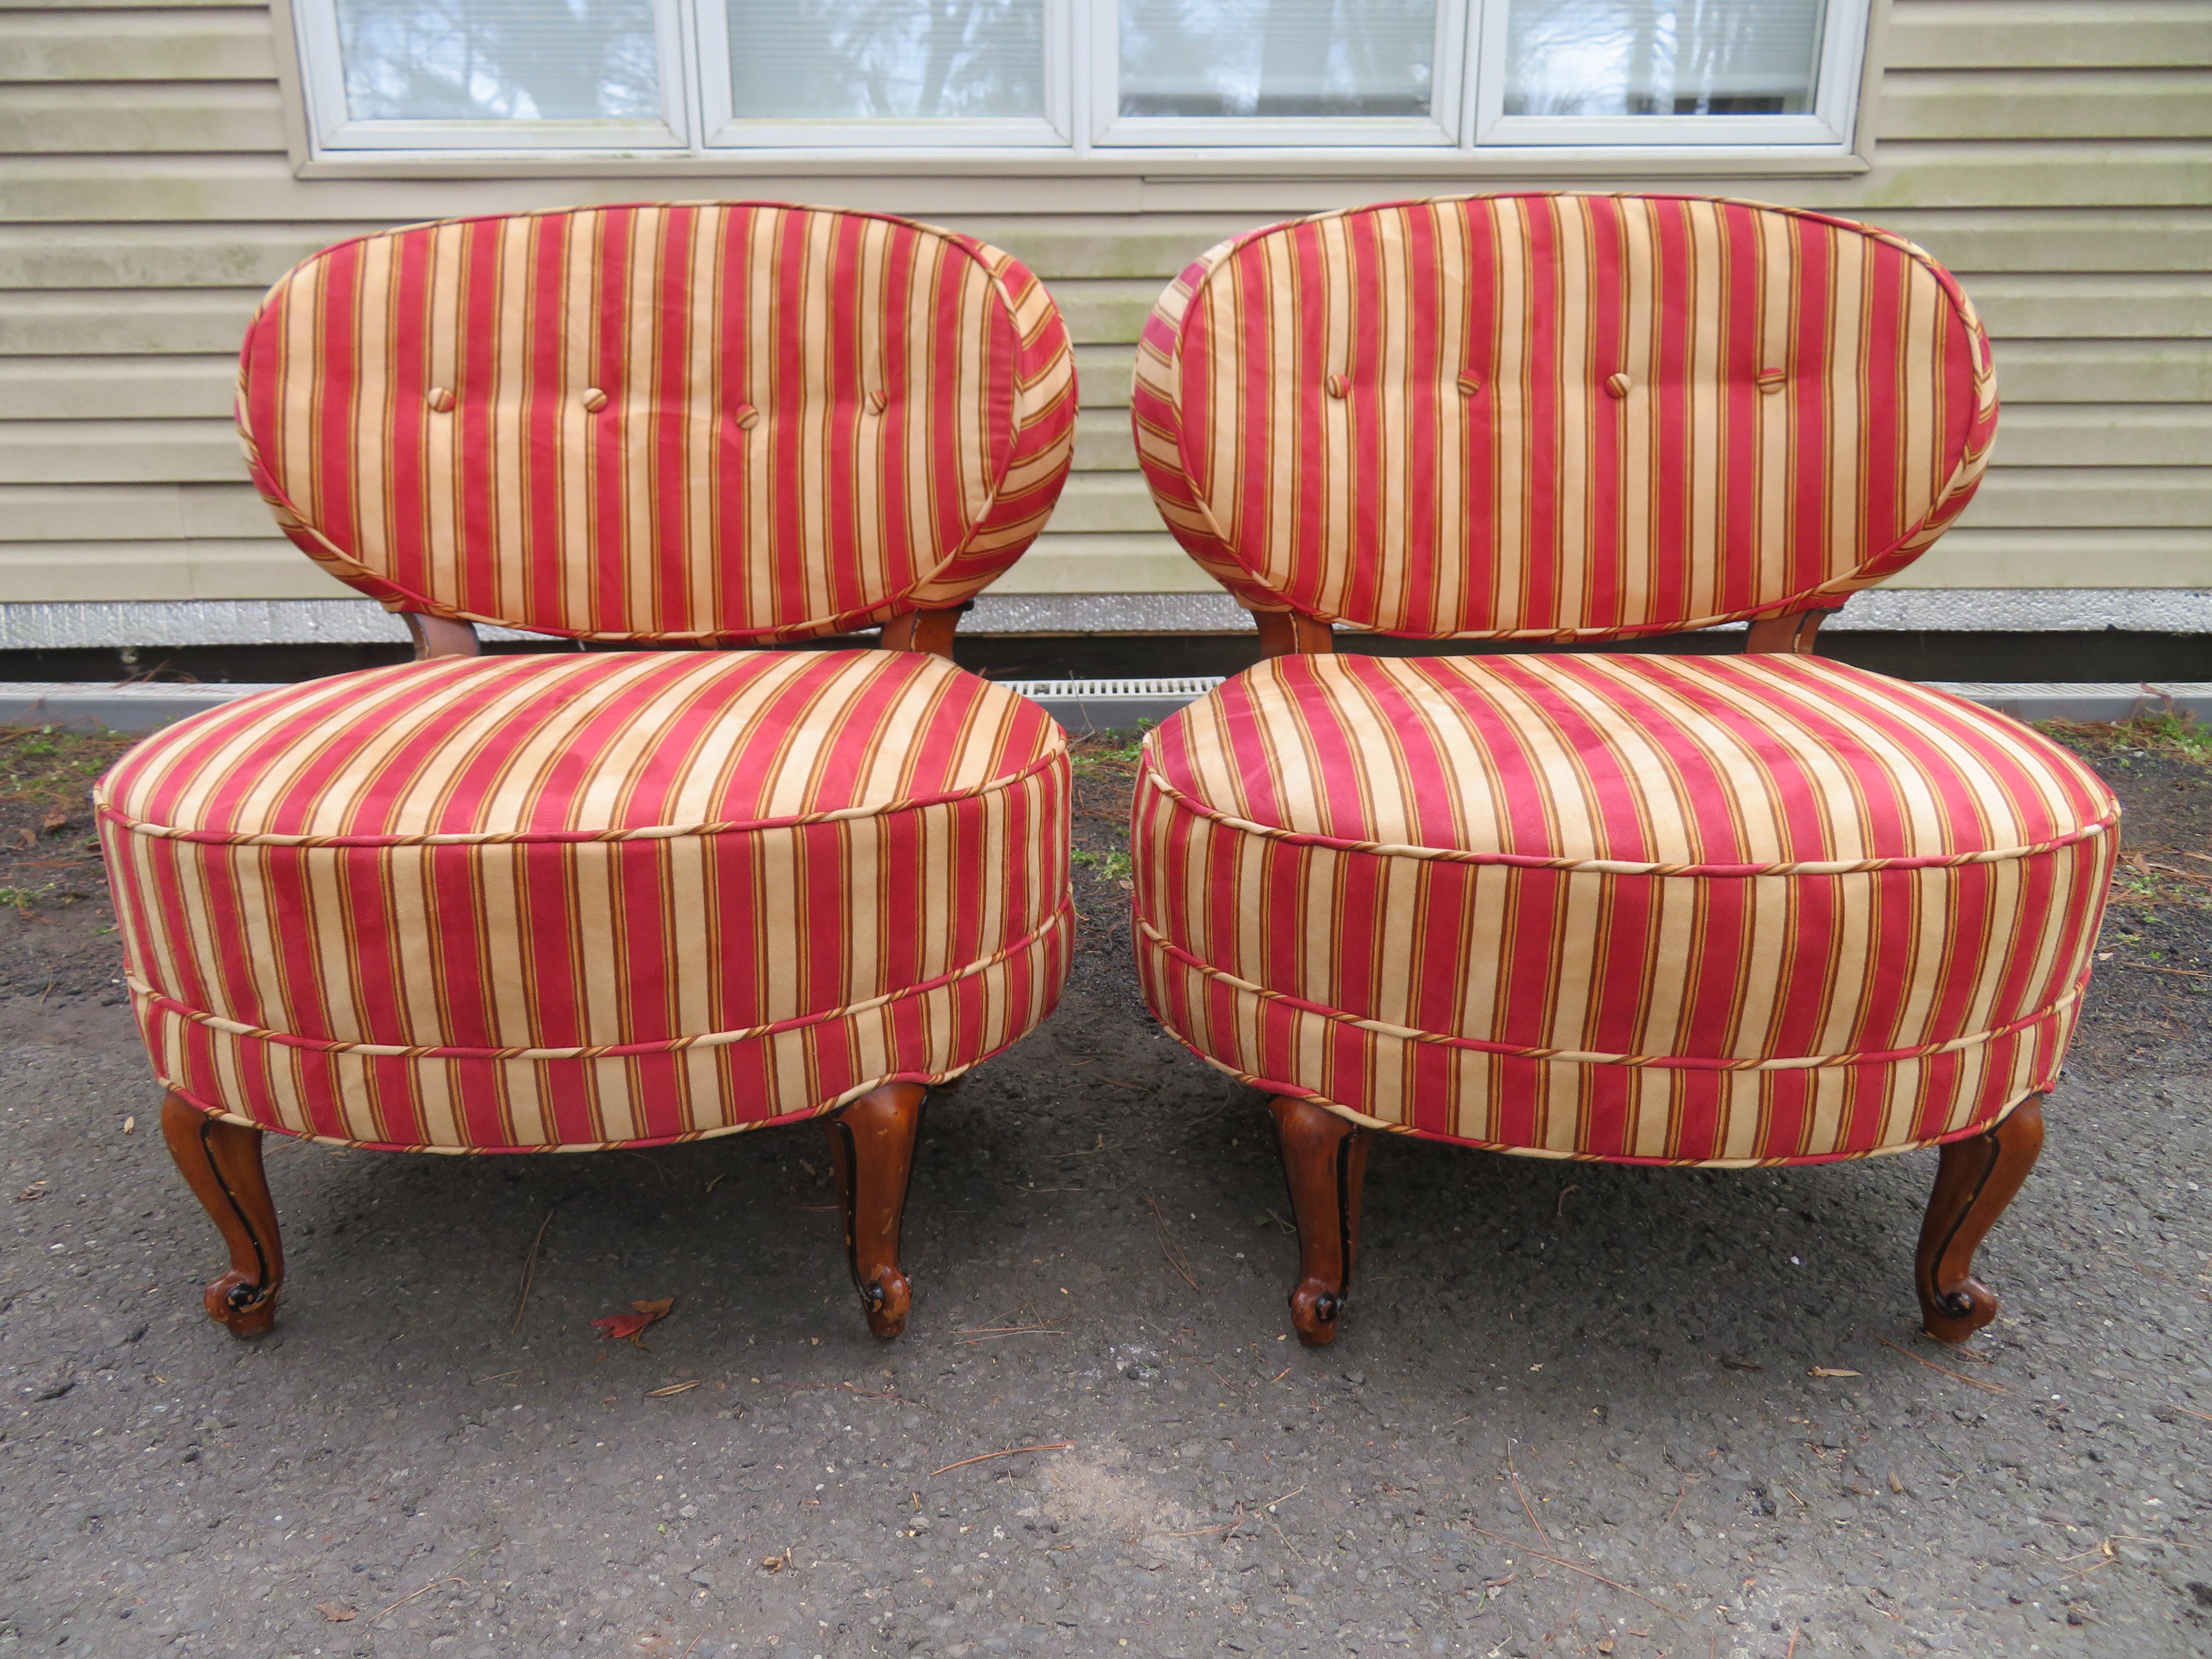 Lovely pair of Napoleon Billy Haines style slipper chairs. These chairs have wonderful wide oval seats and generous curved backs. Also check out the well carved stout cabriole legs all around-very stylish! They were re-upholstered within the last 10